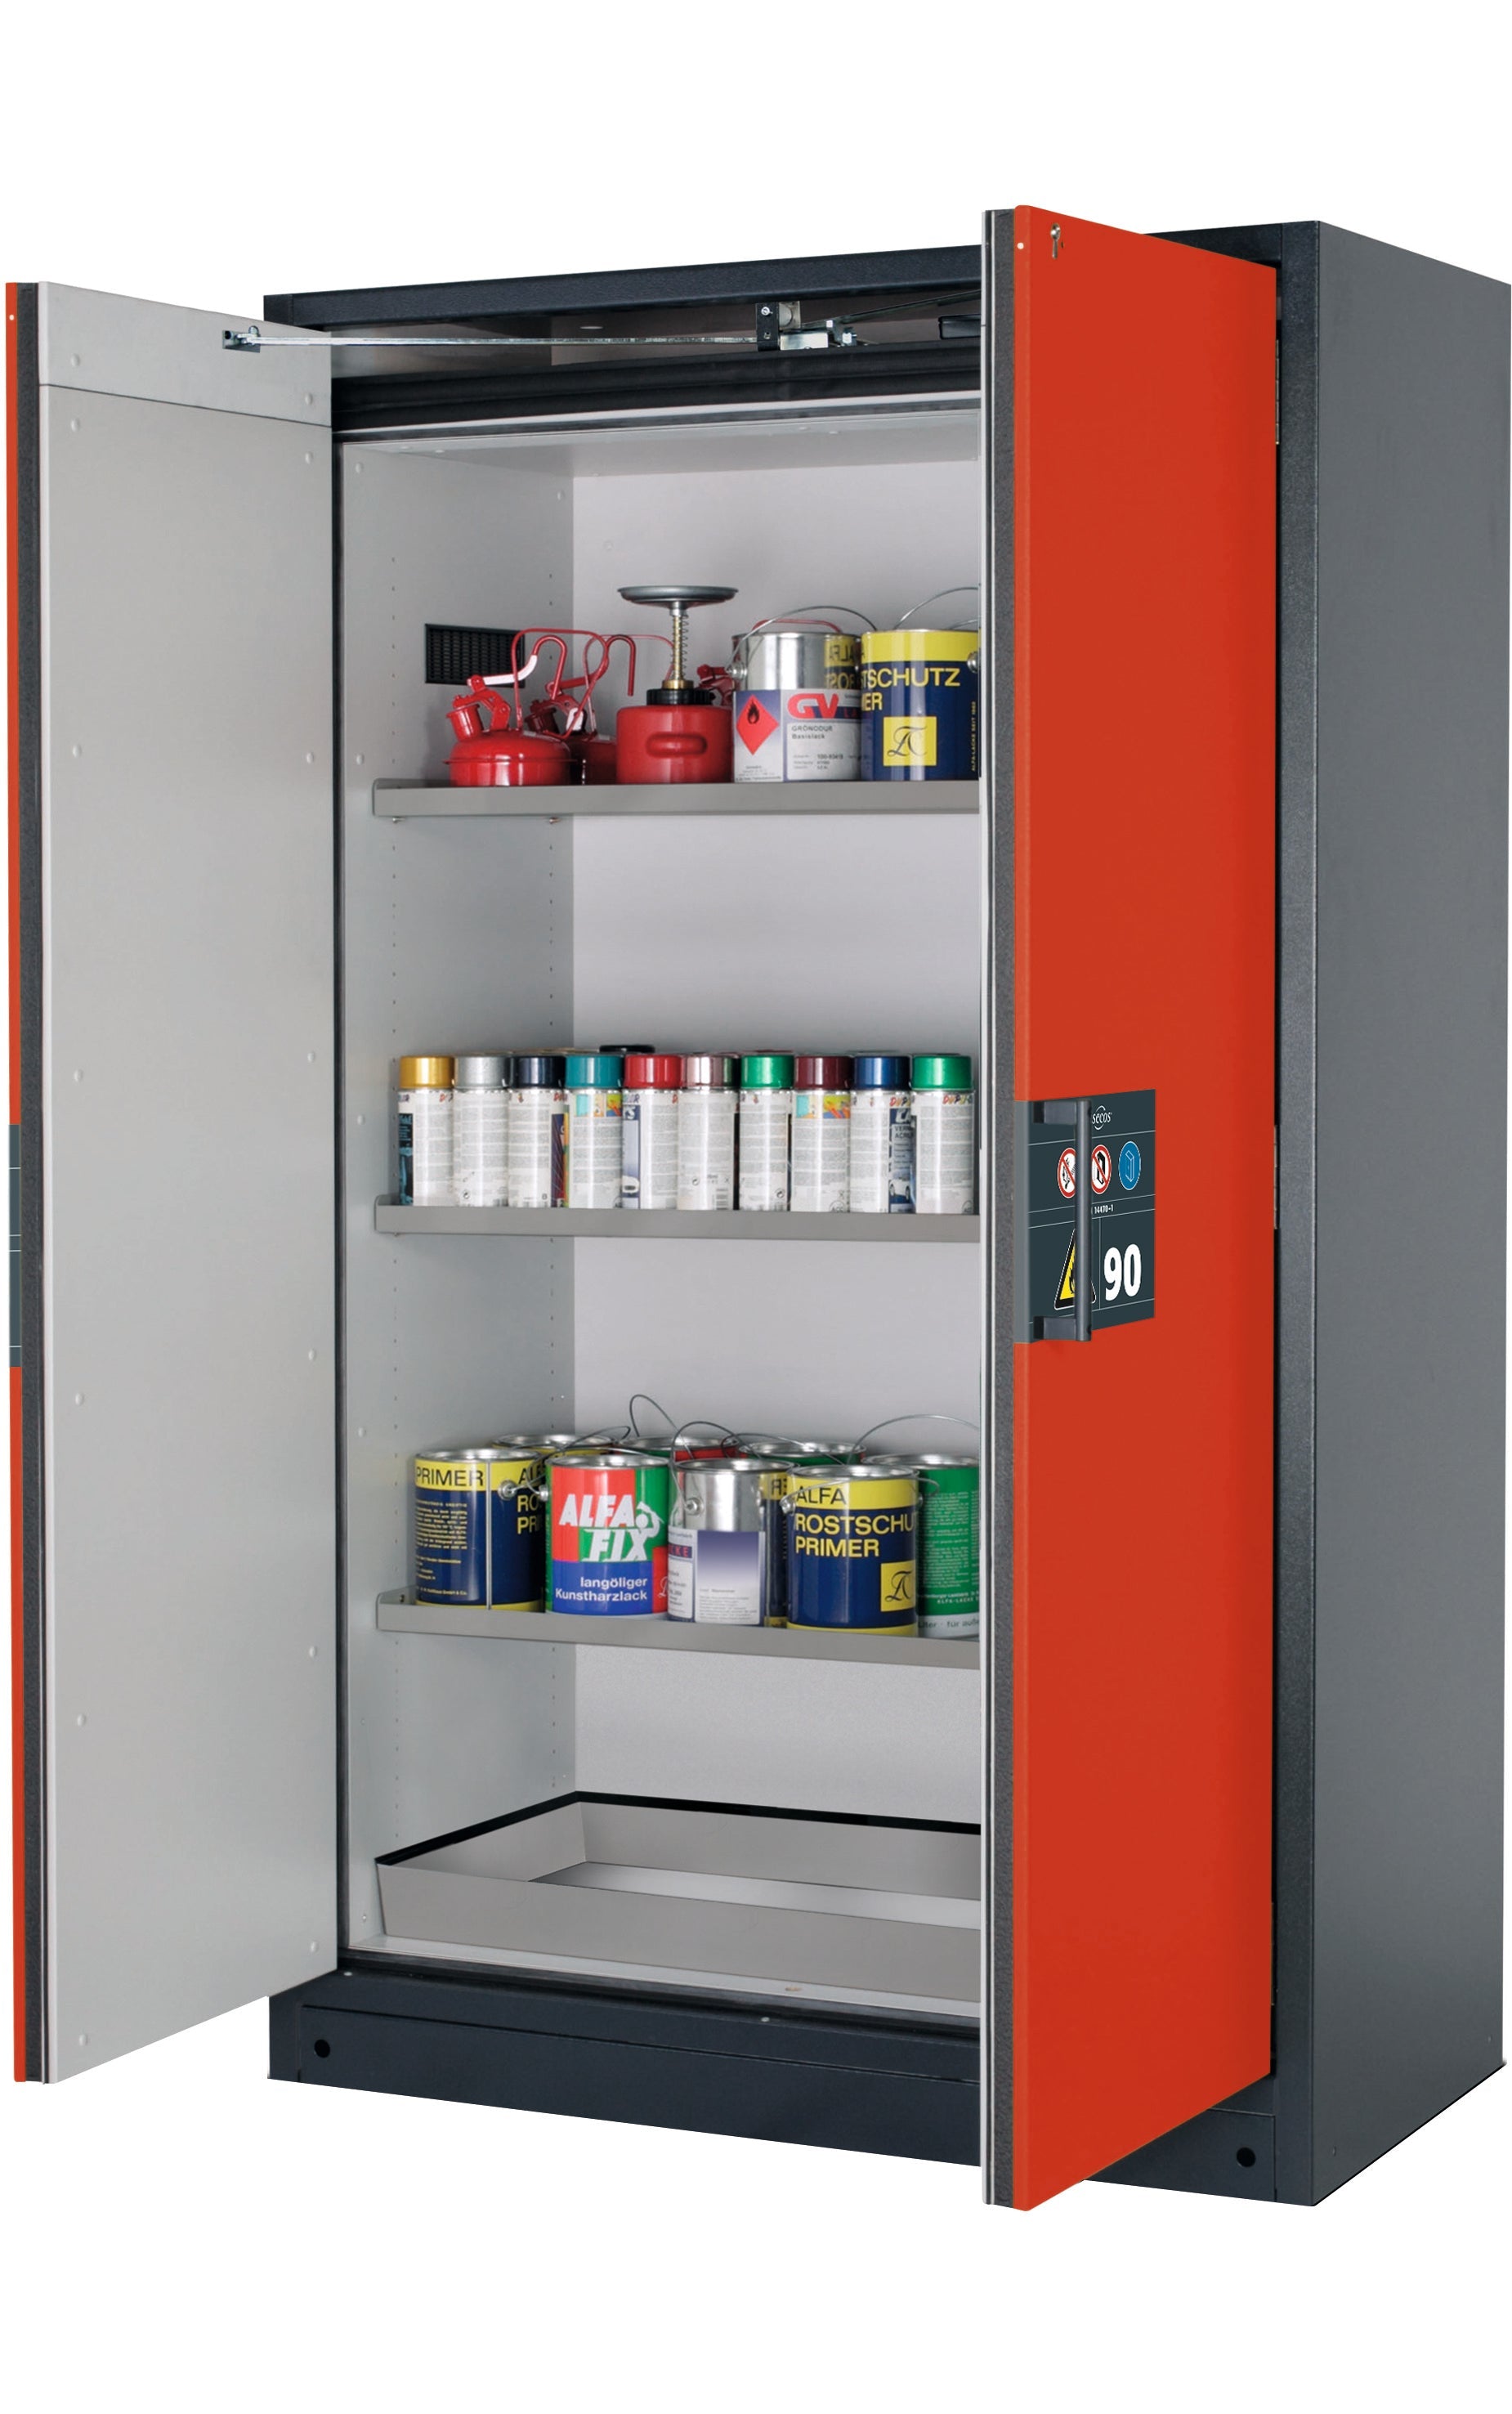 Type 90 safety storage cabinet Q-PEGASUS-90 model Q90.195.120.WDAC in traffic red RAL 3020 with 3x shelf standard (stainless steel 1.4301),